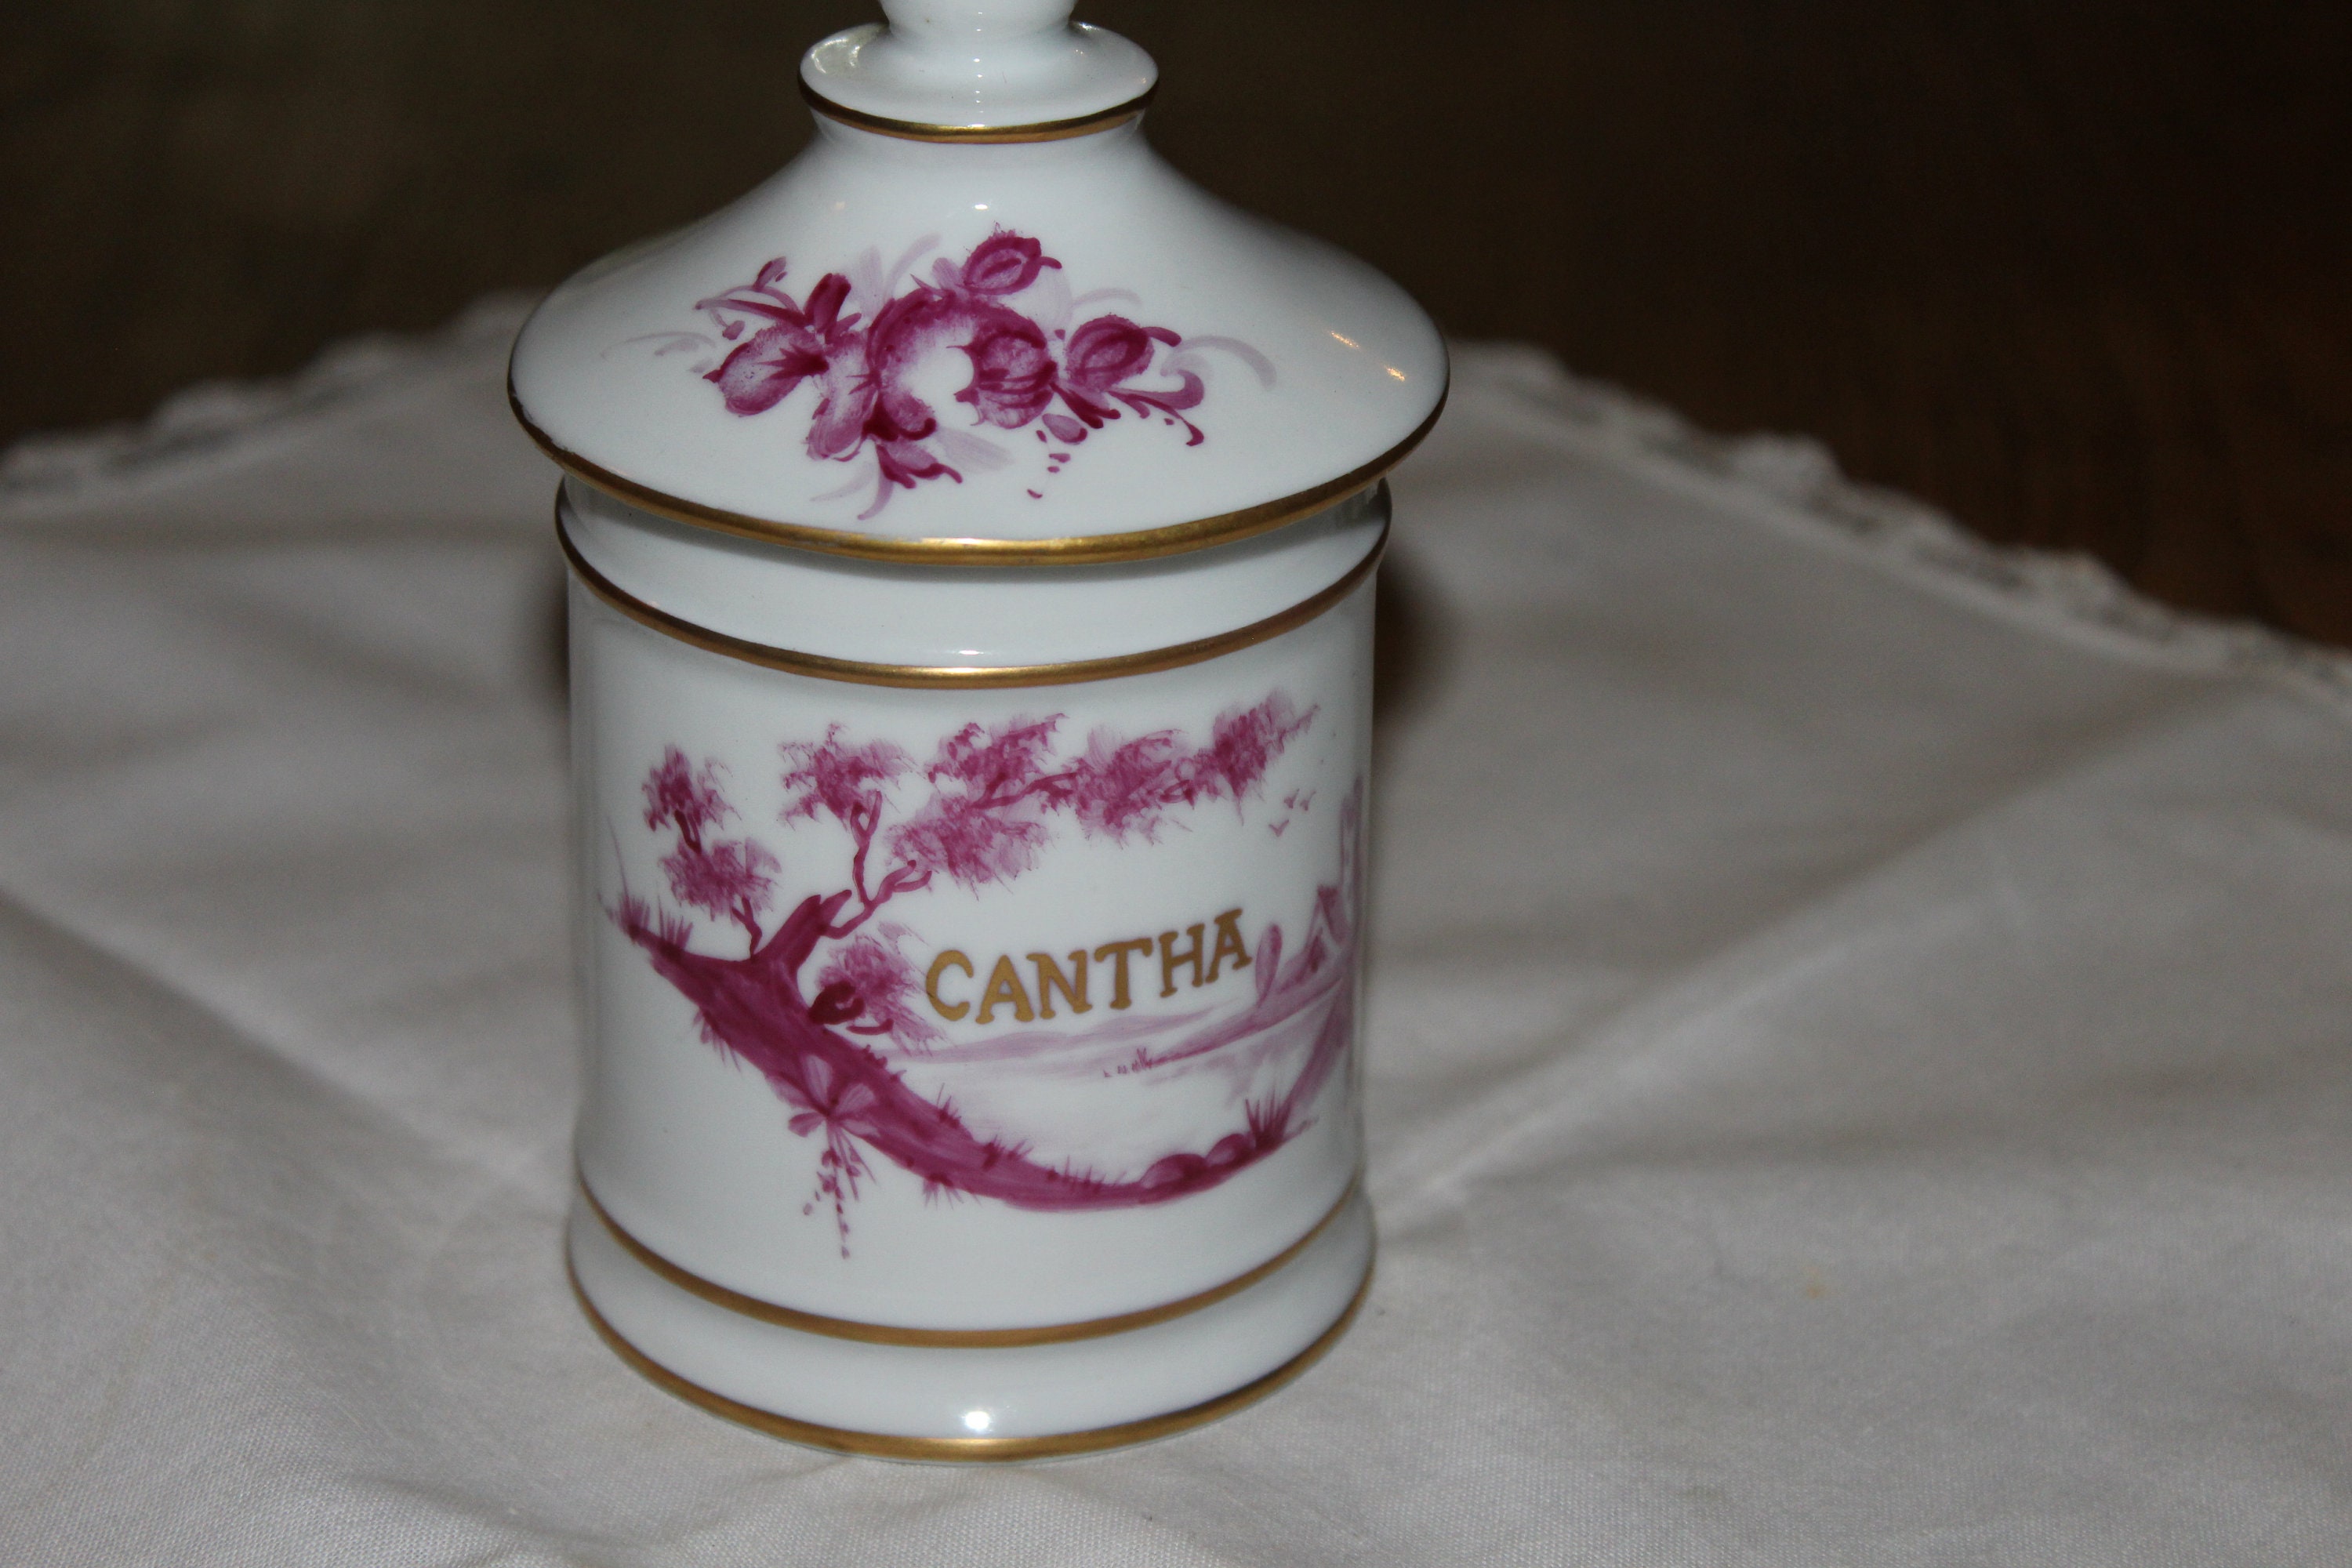 Limoges - Rare Late 19Th Cenruty Old Apothecary's Cantha Jar in Fine White French Porcelain With Del